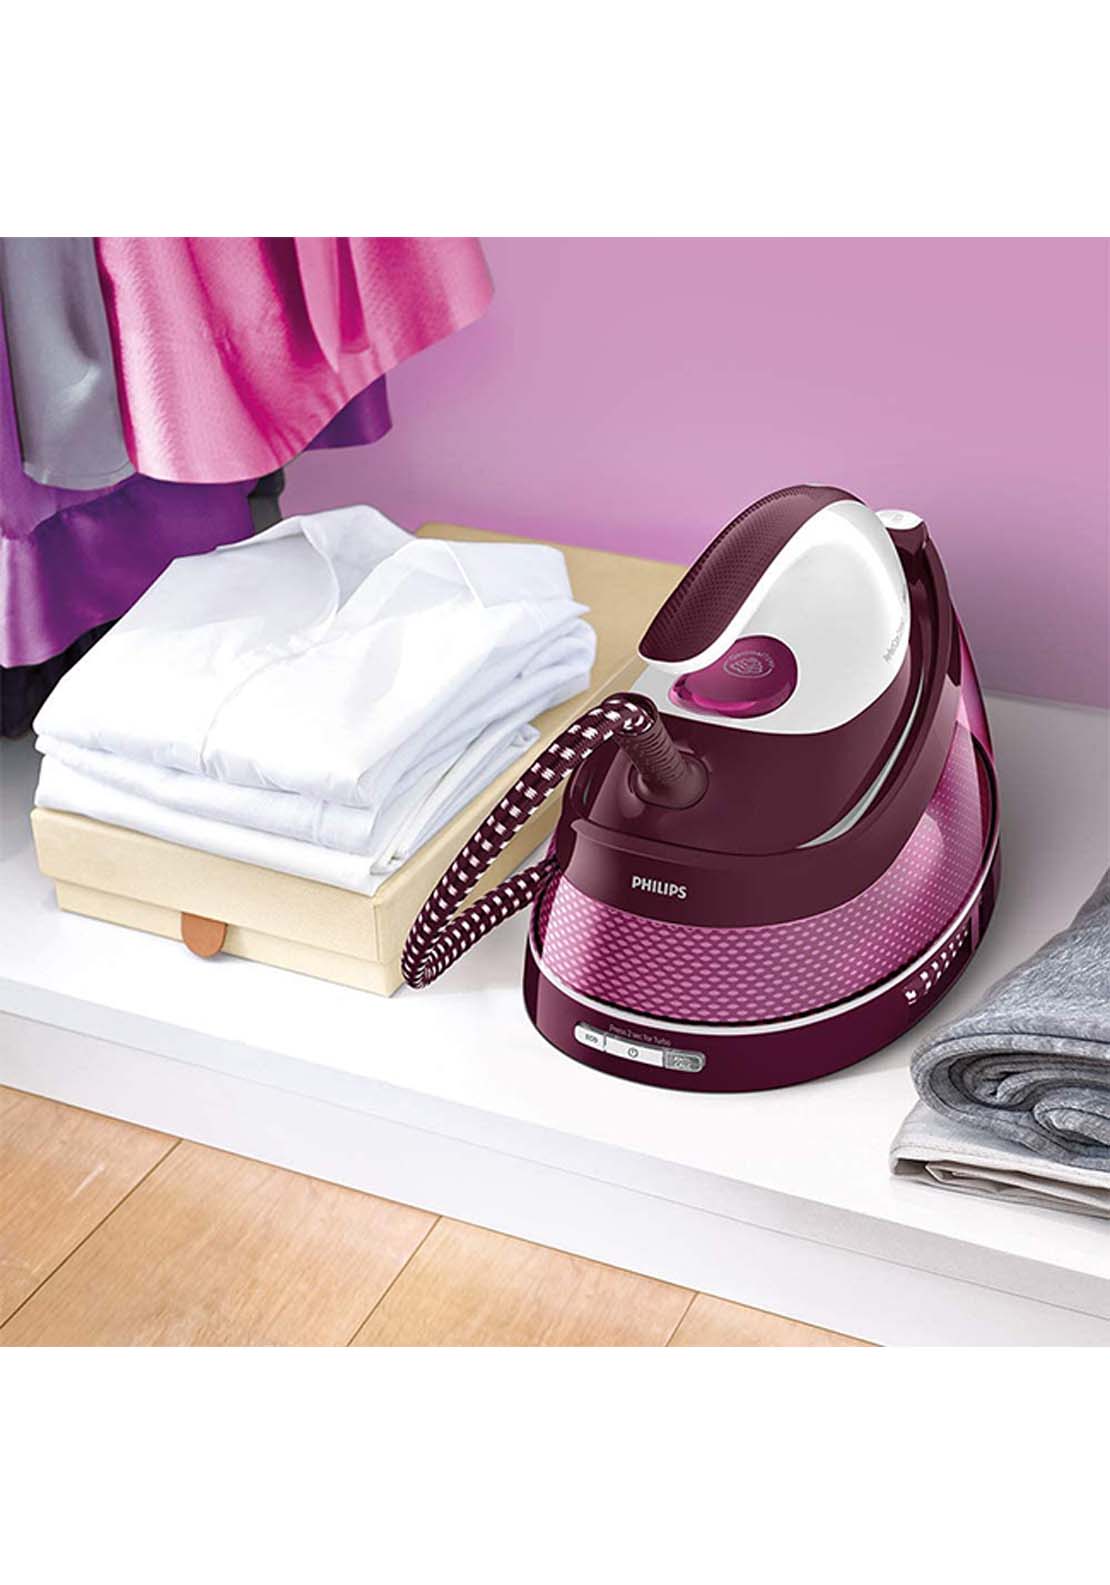 Philips PerfectCare Steam Iron | Gc784246 5 Shaws Department Stores